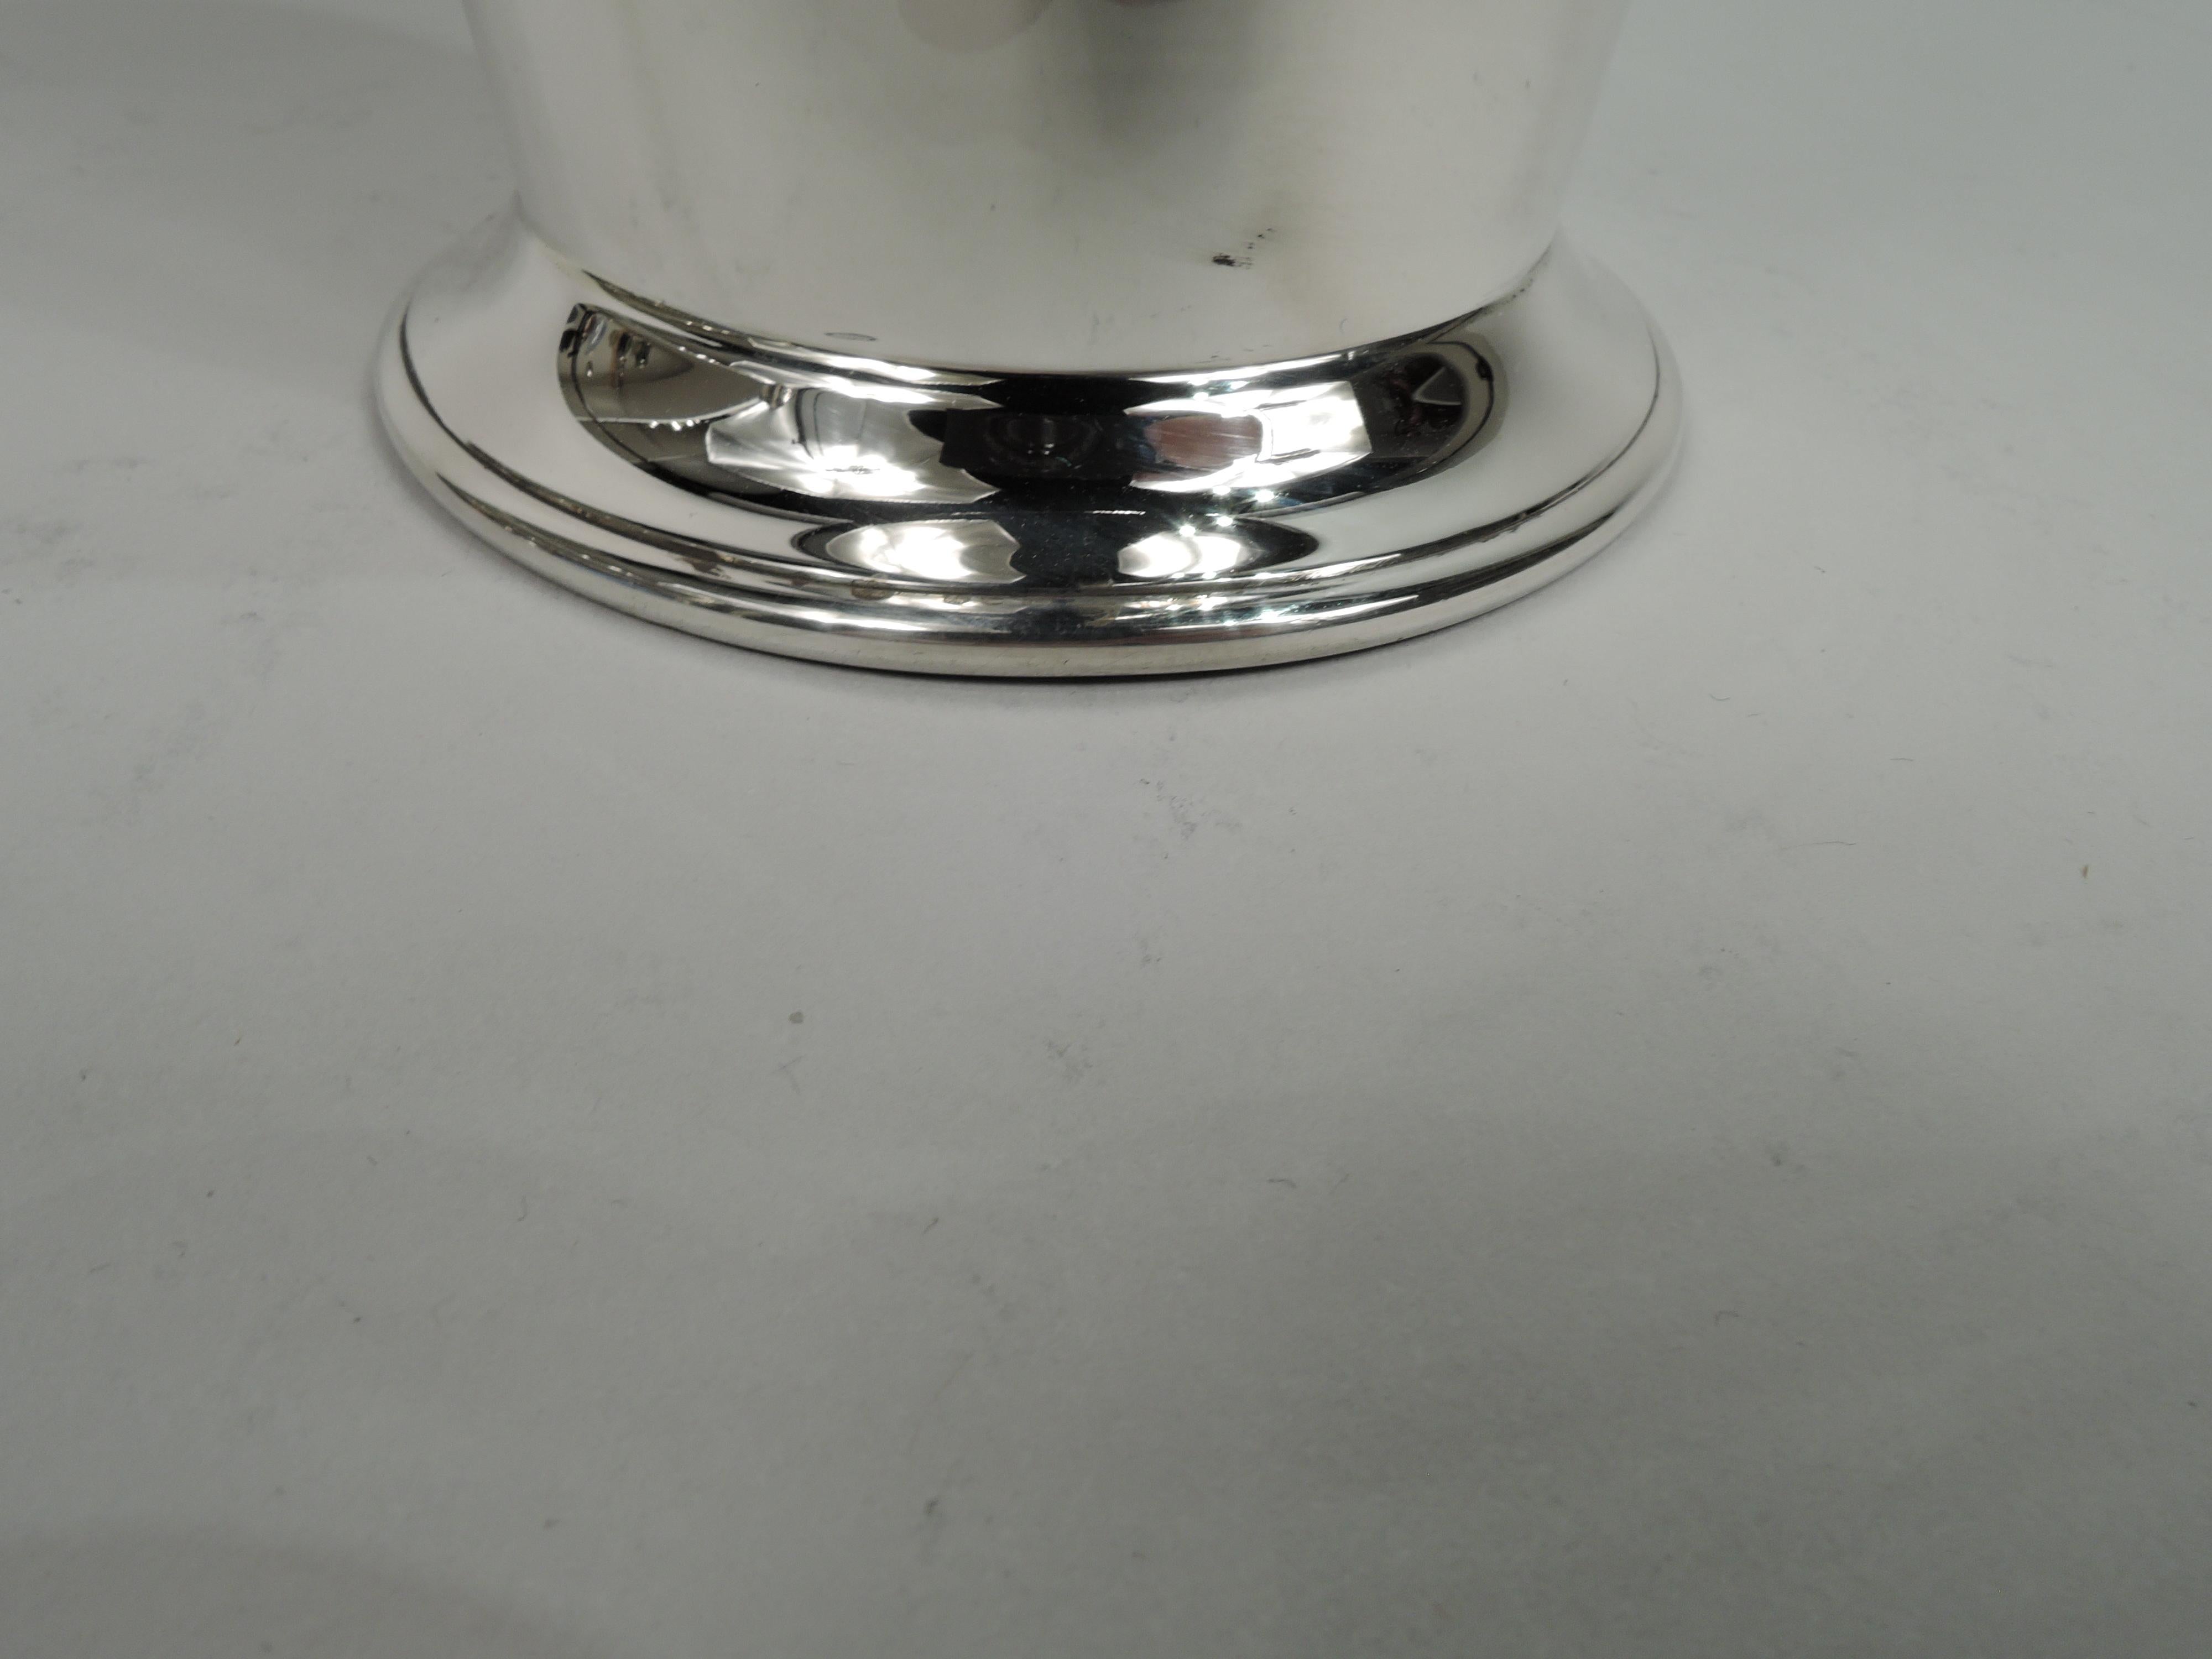 20th Century American Art Deco Sterling Silver Cocktail Shaker